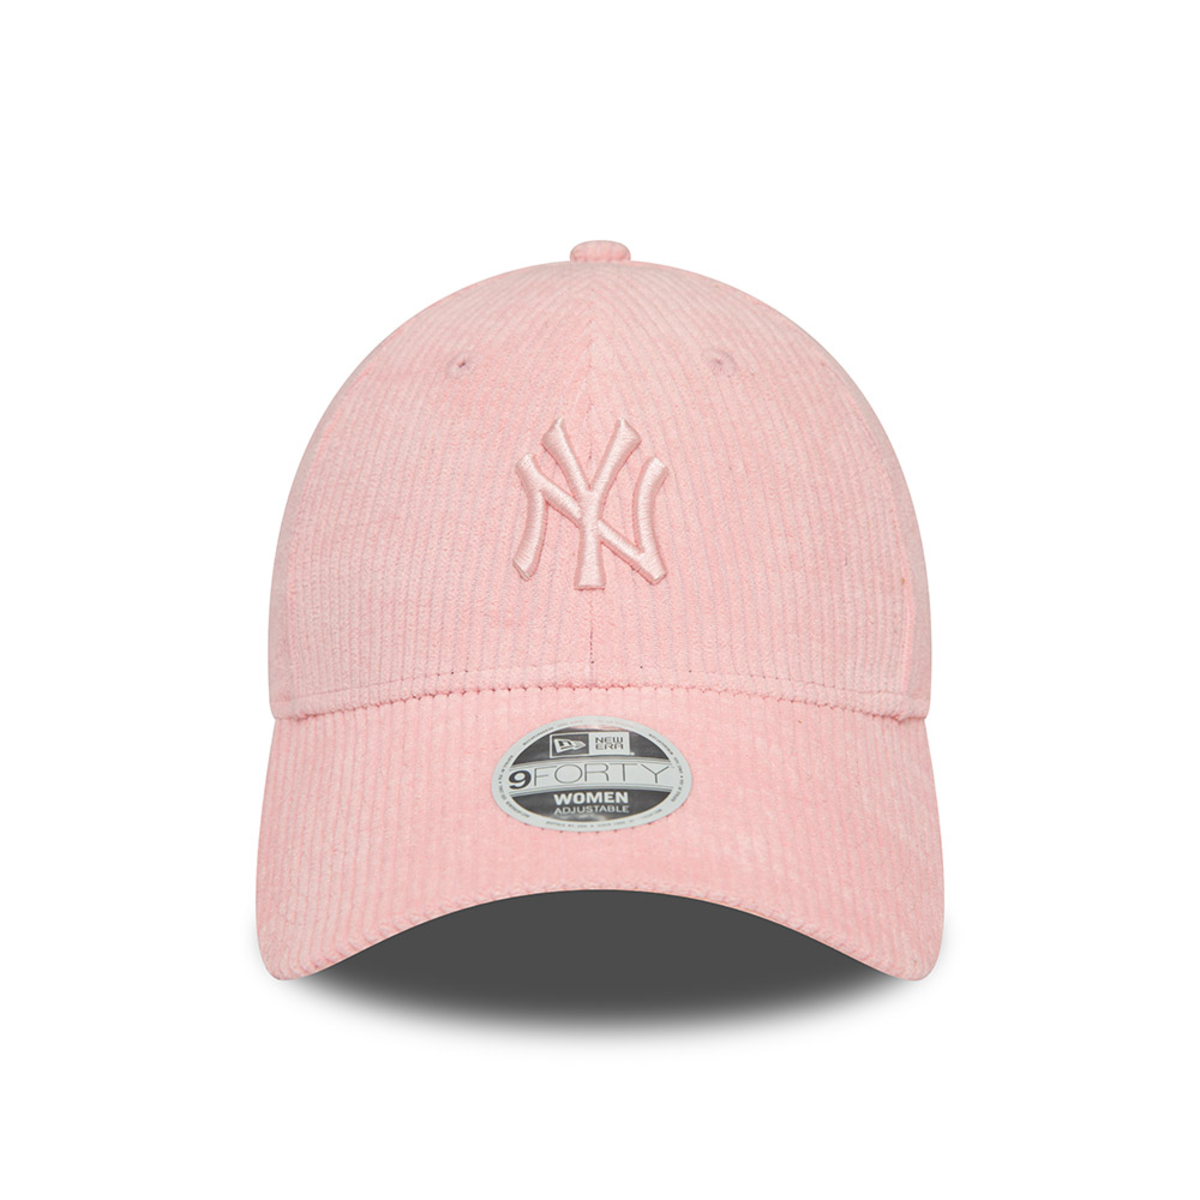 NEW ERA NEW YORK YANKEES LEAGUE ESSENTIAL 9FORTY® MUJER New Era